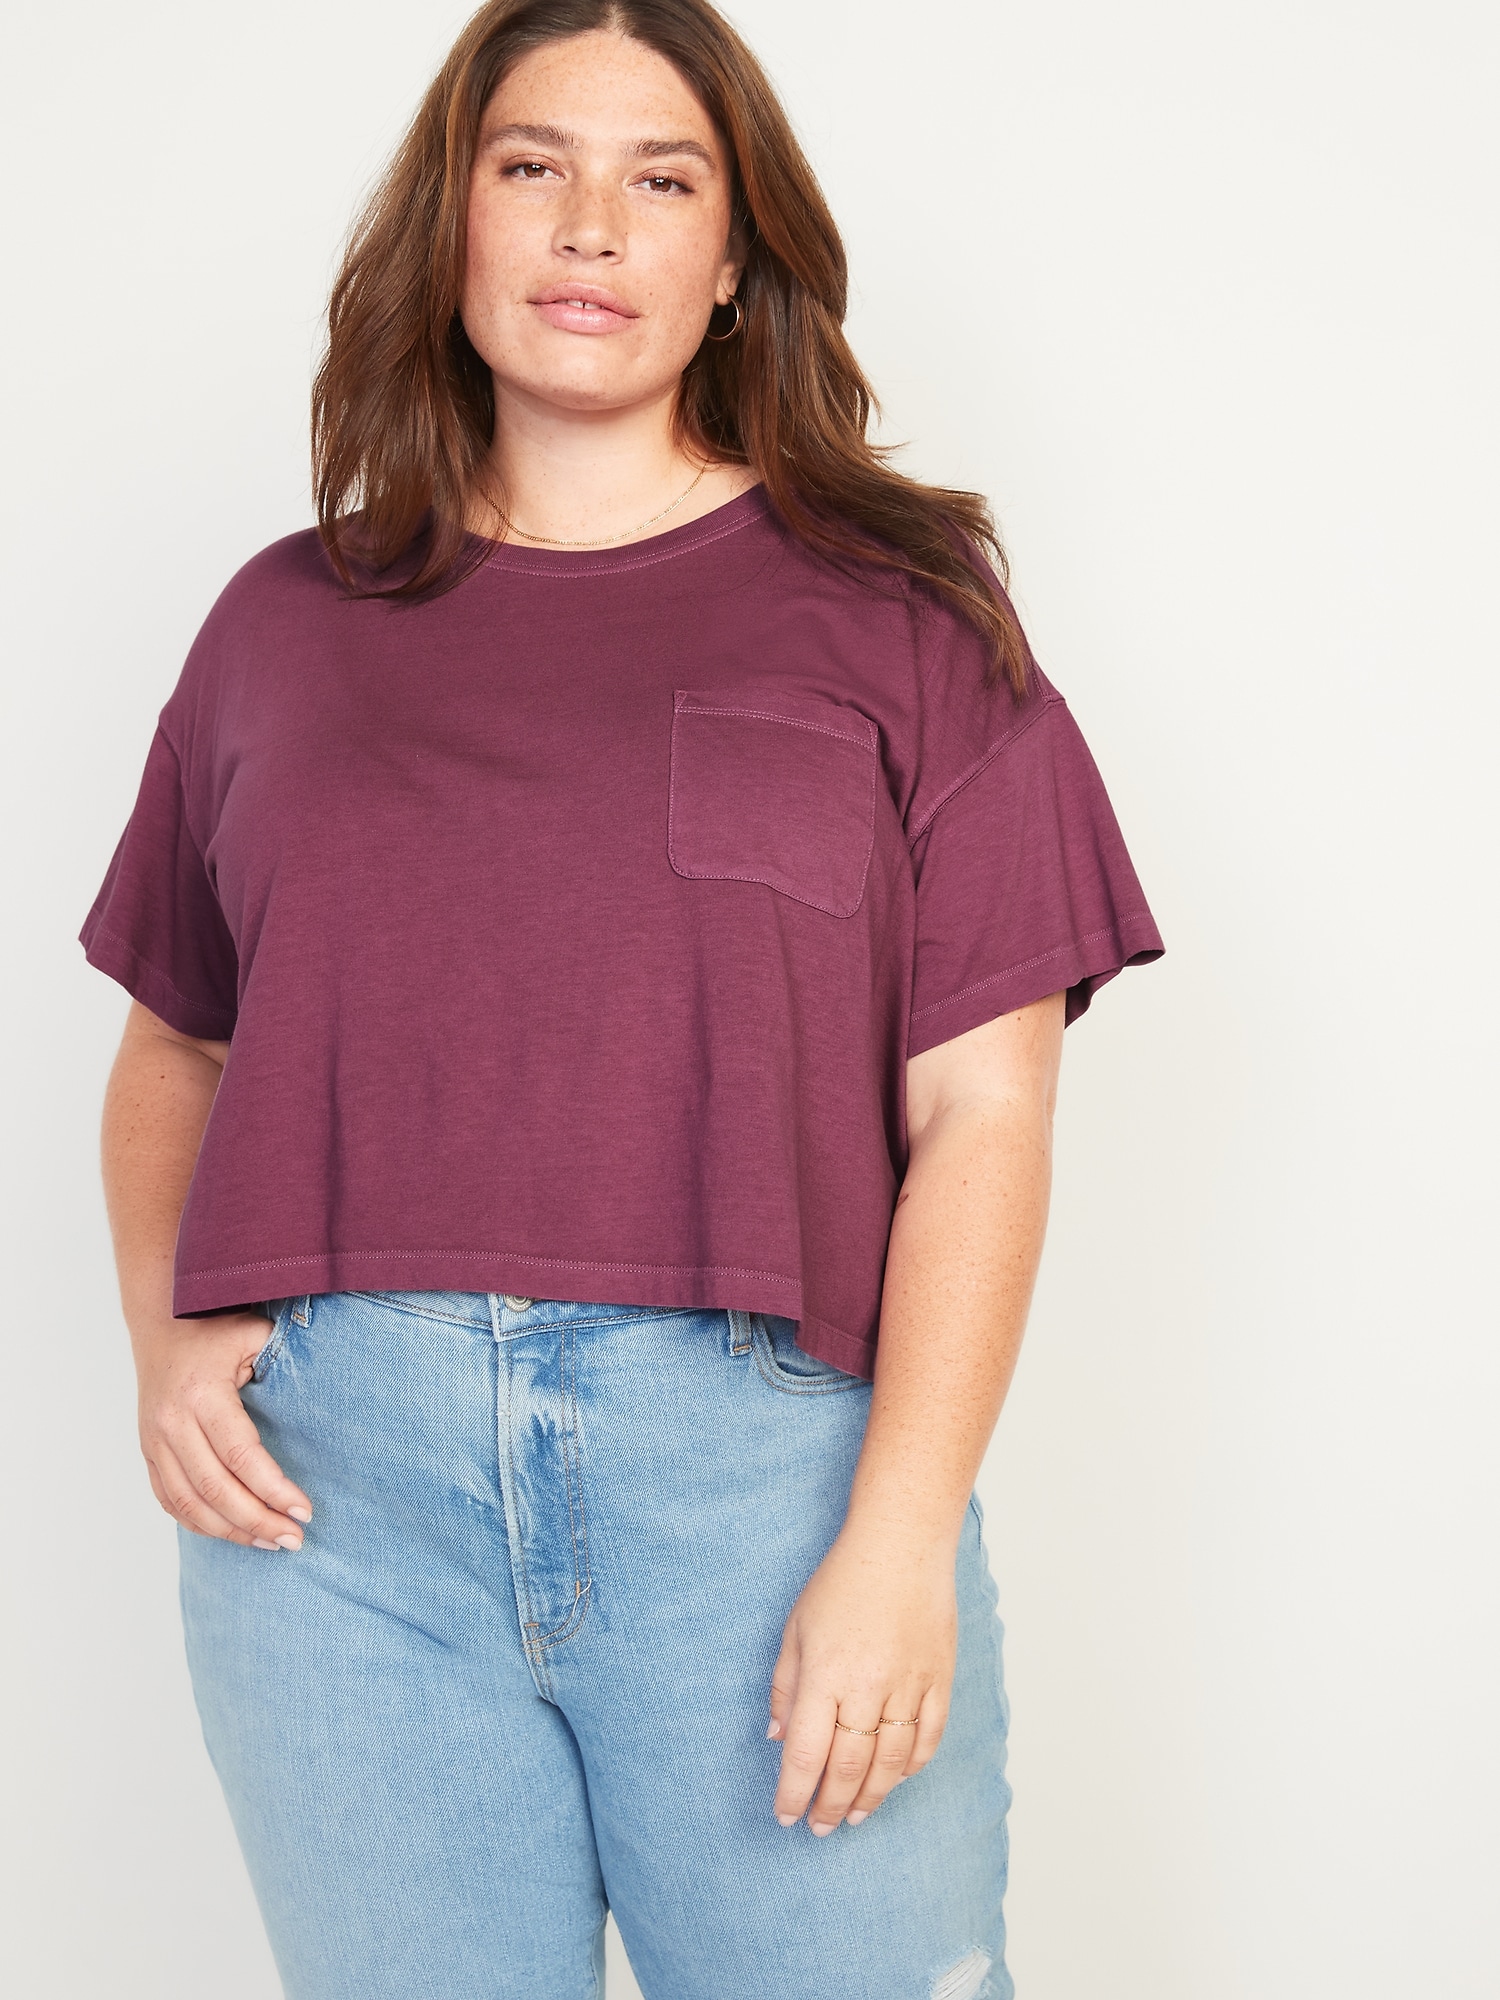 Oversized Garment-Dyed Cropped T-Shirt for Women | Old Navy